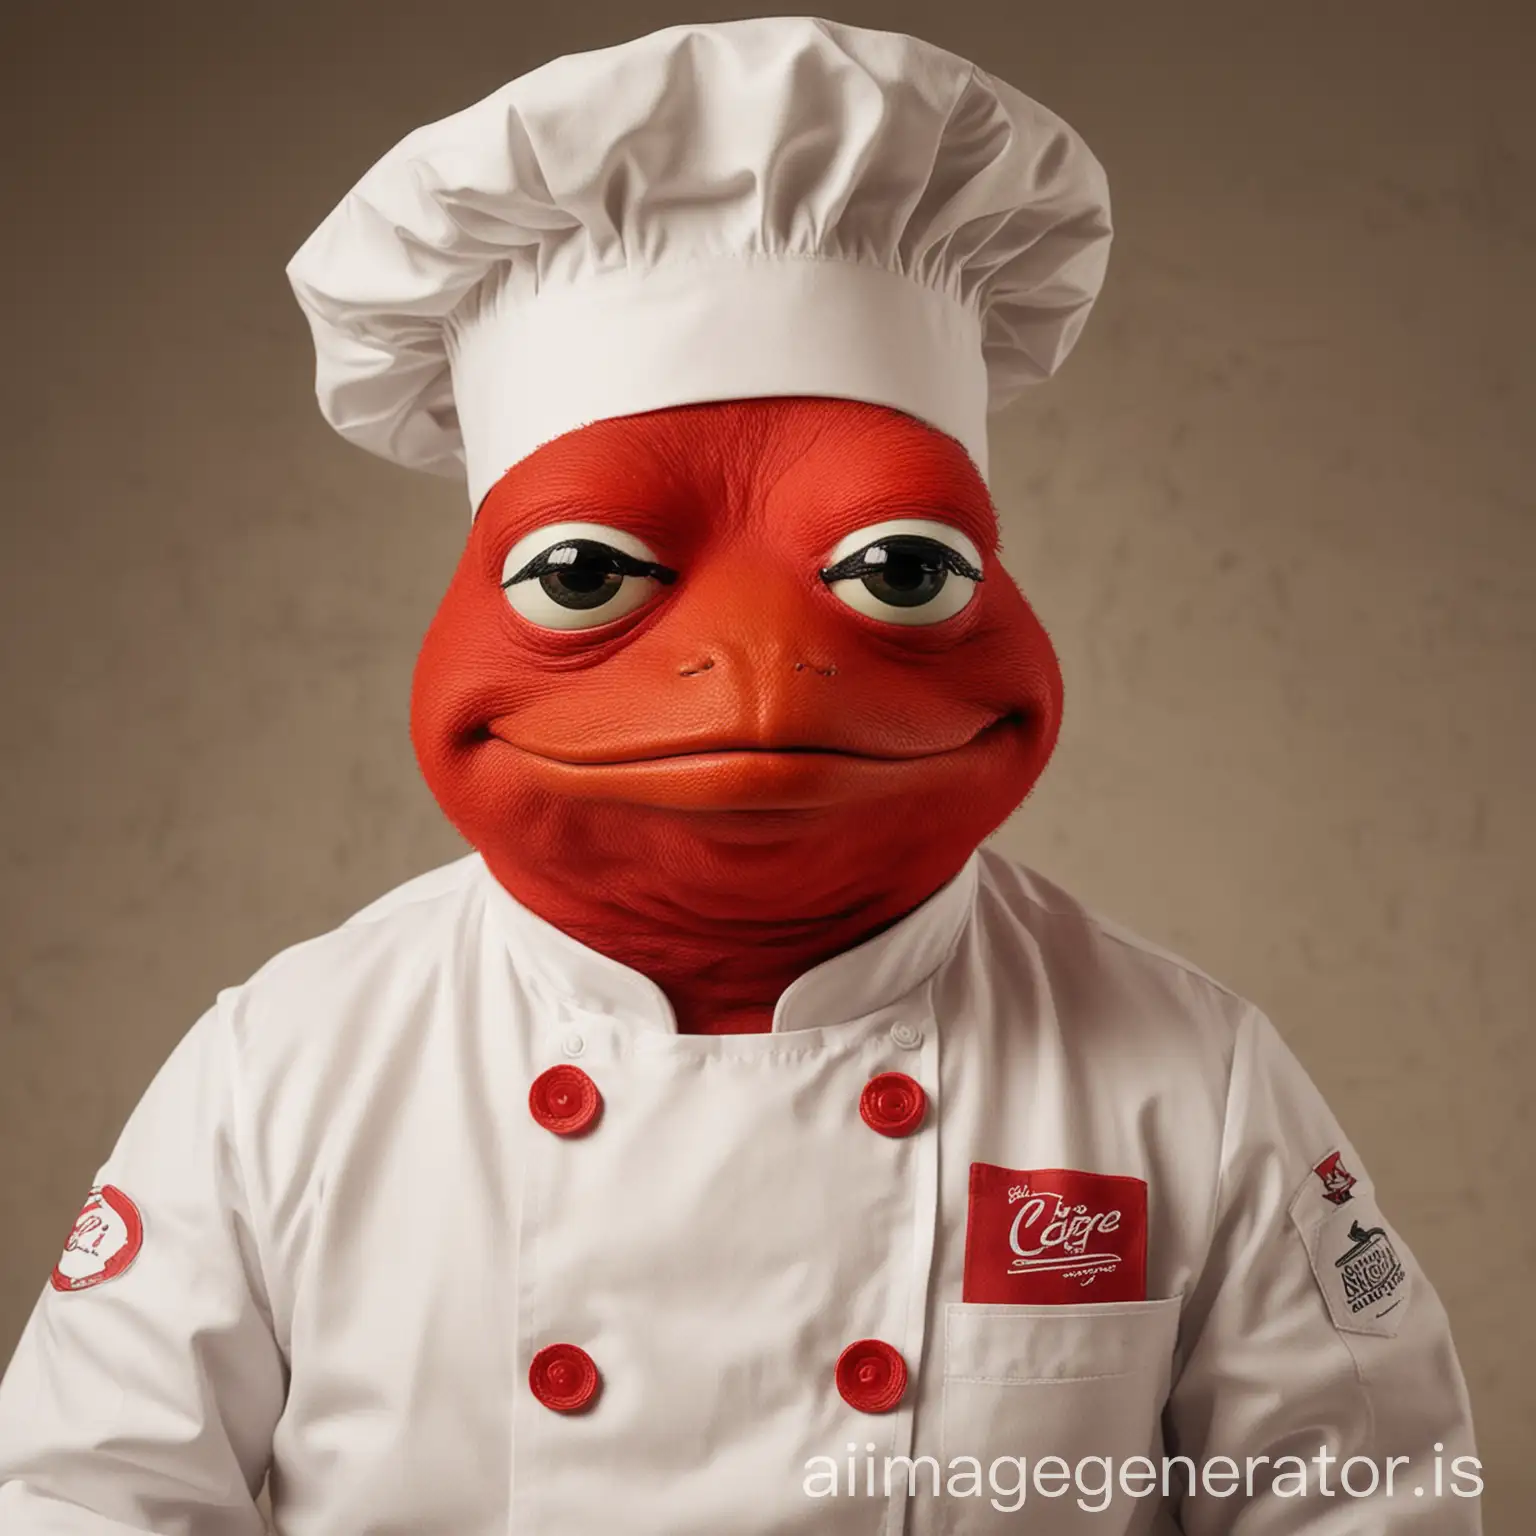 Chefs-in-Red-Professional-PEPEs-in-Colorful-Chef-Uniforms